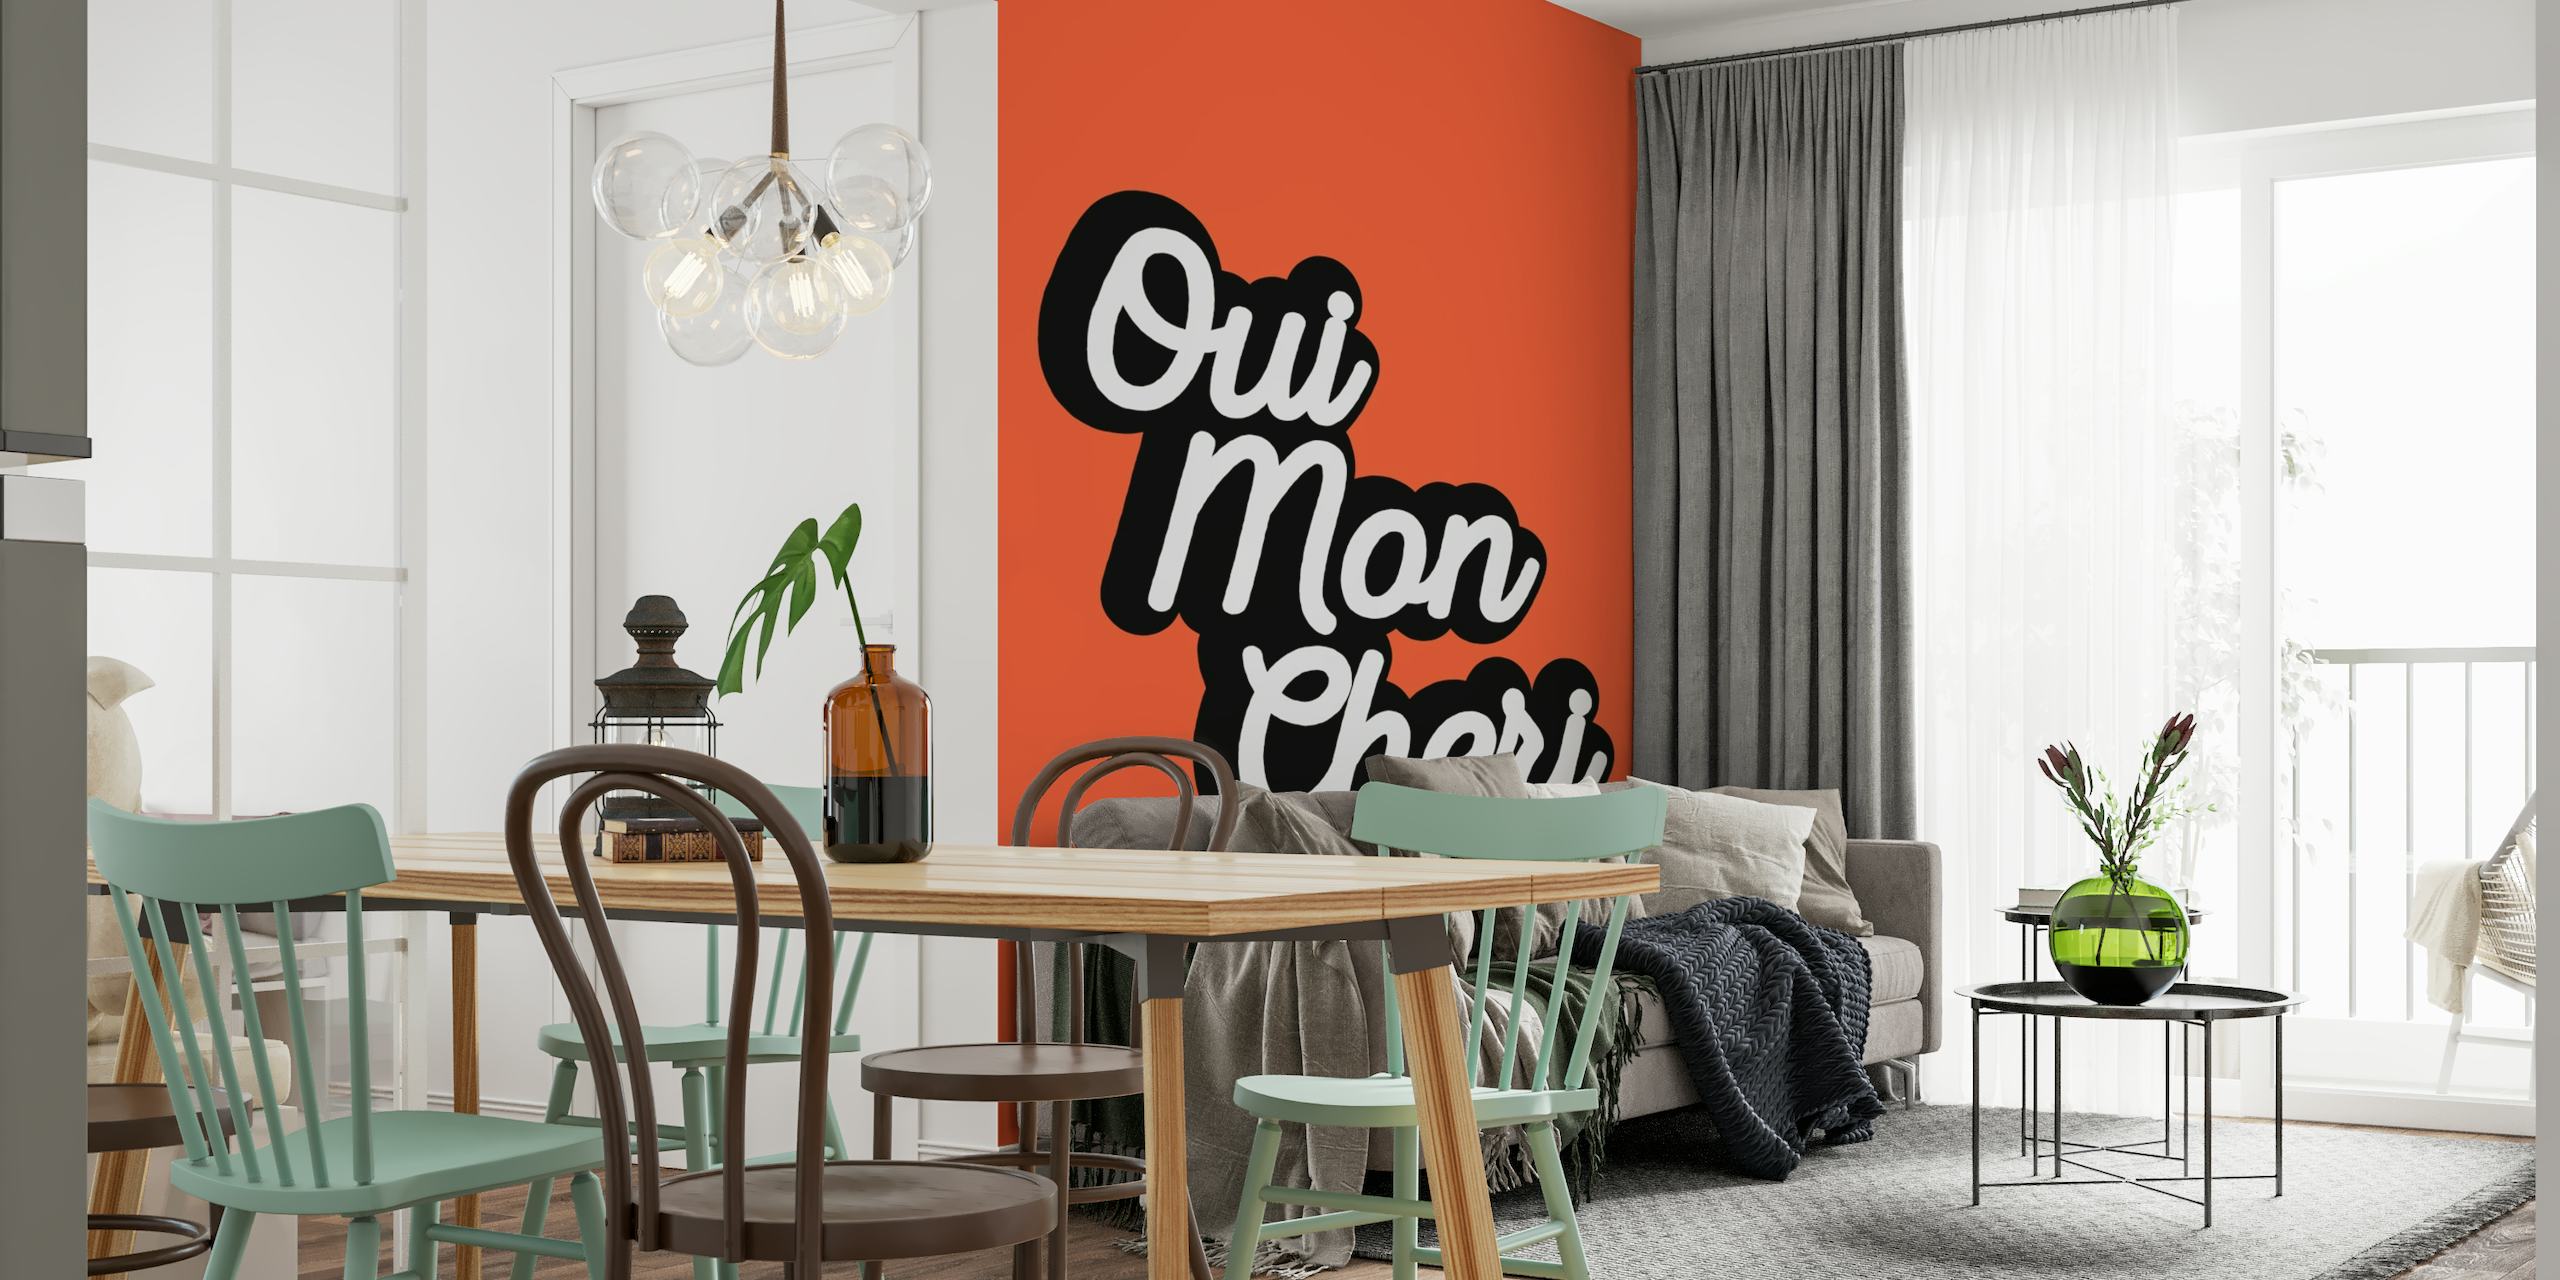 Oui Mon Cheri lettering in stylish font on a vibrant background wall mural